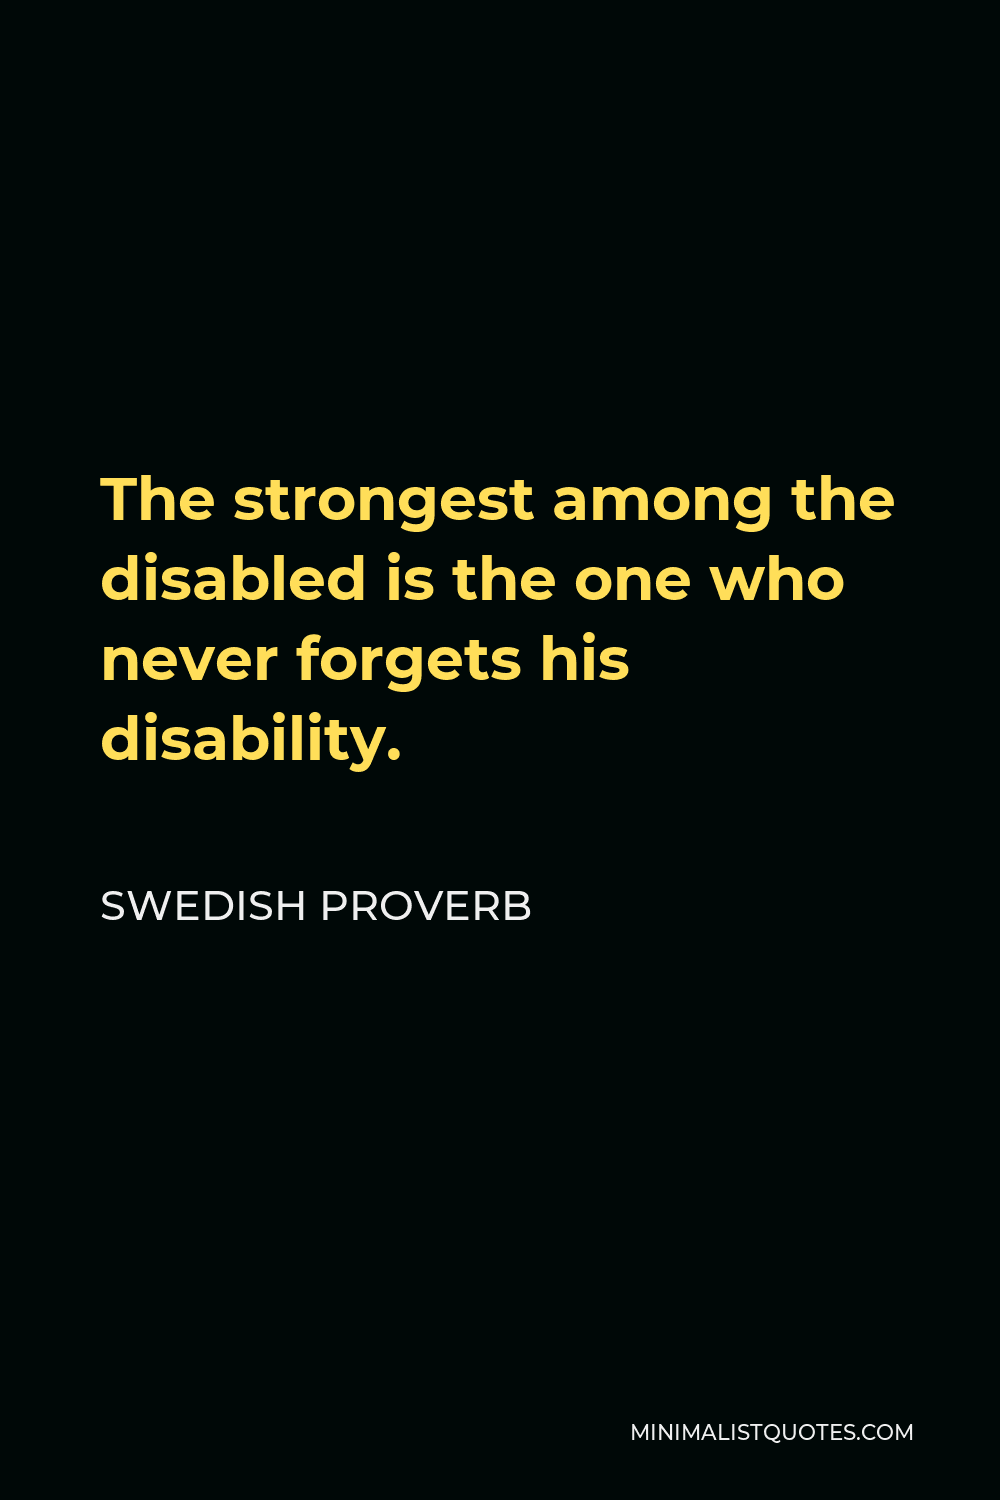 Swedish Proverb Quote - The strongest among the disabled is the one who never forgets his disability.